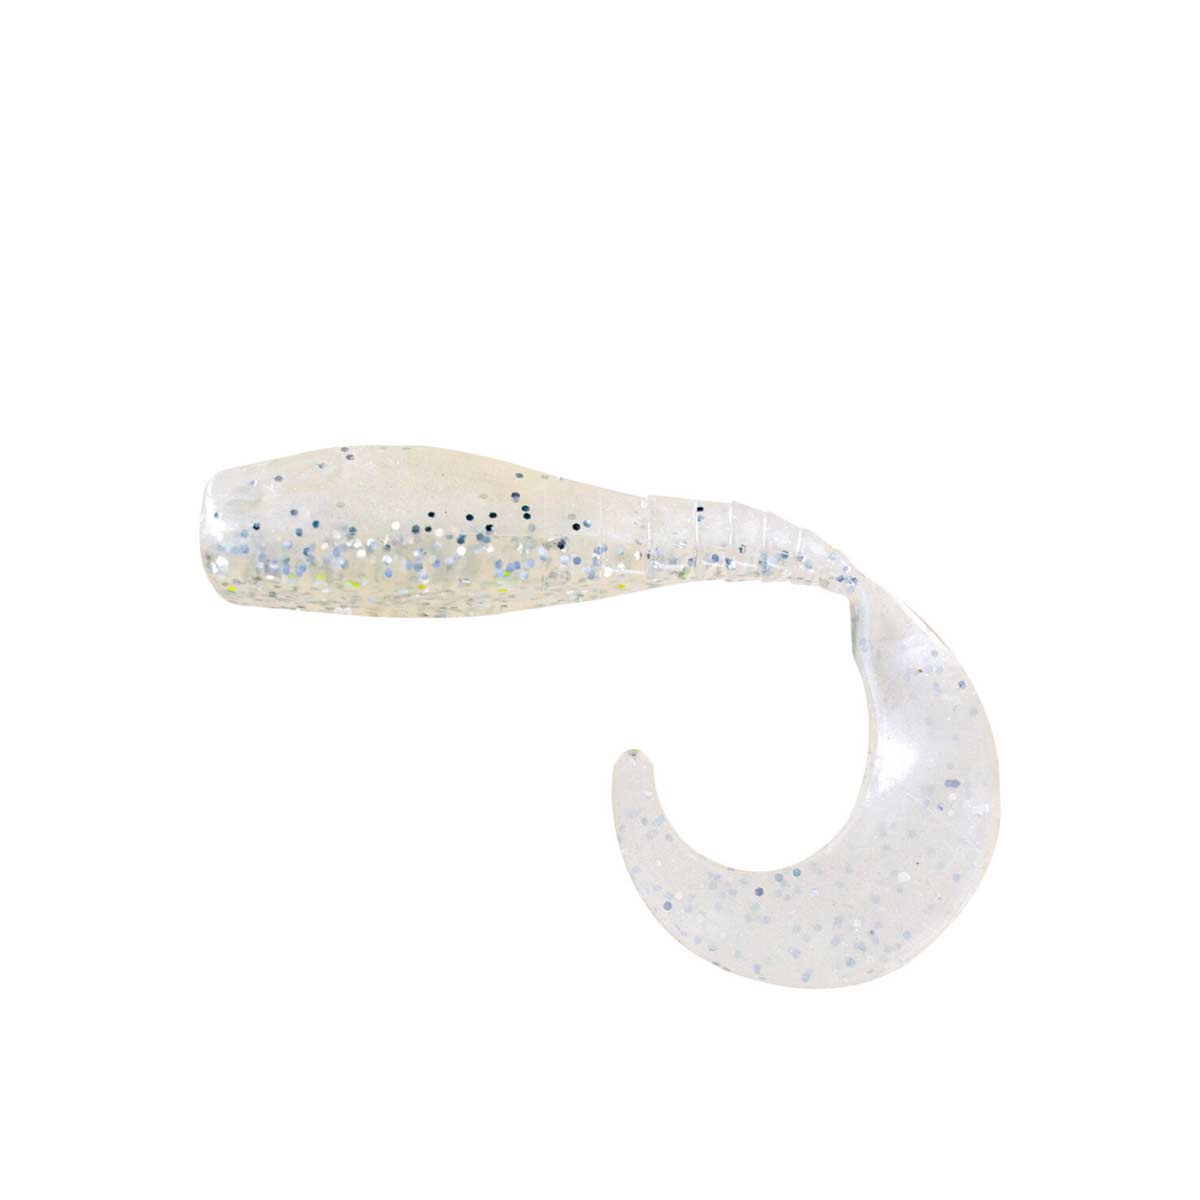 Curly Tail Crappie Minnow_Silver Glitter/Pearl